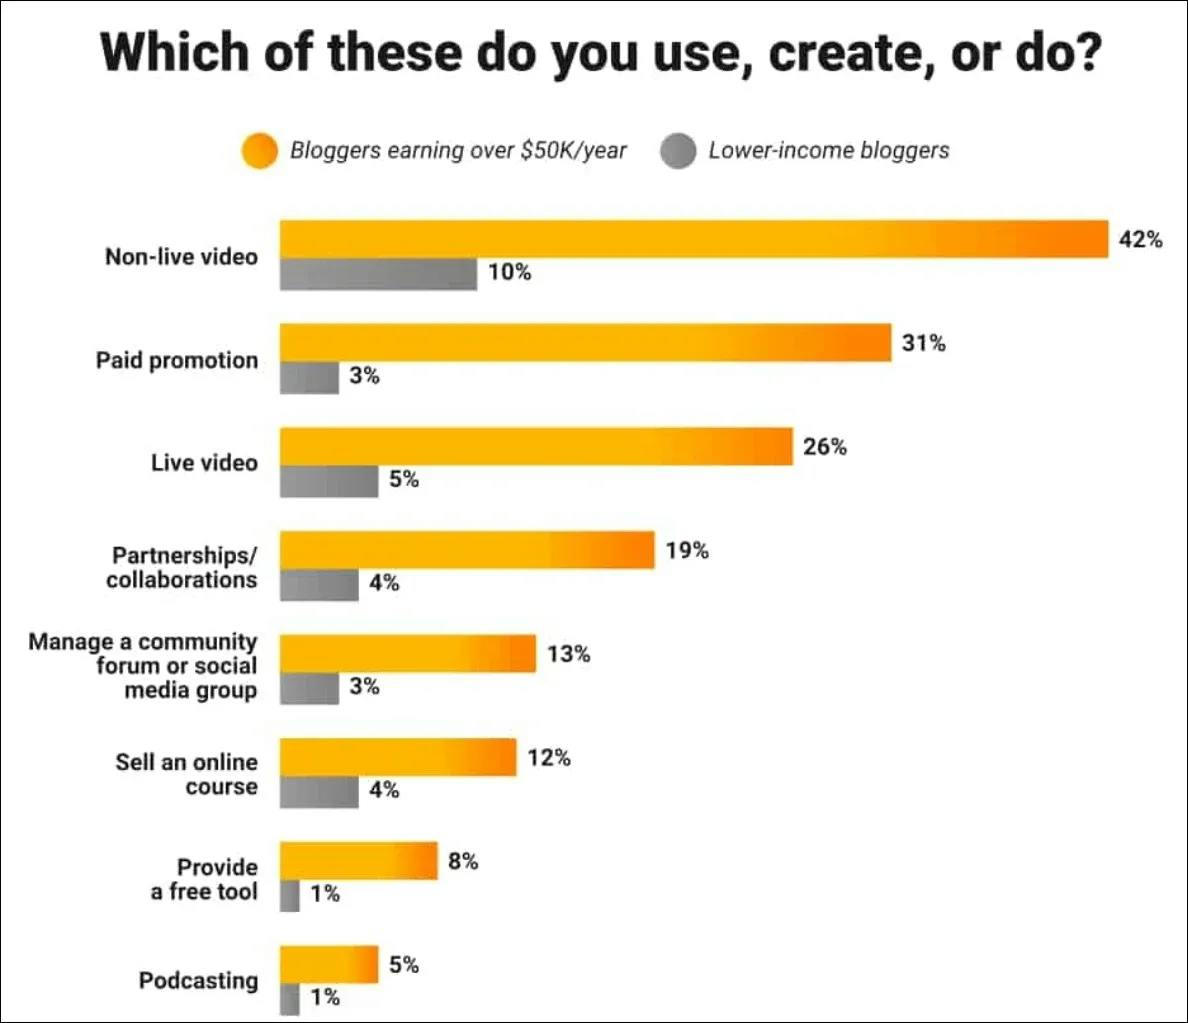 Infographics: Which of these do you use, create, or do? Non-live video, Paid promotion, Live video, Partnerships/collaborations, Manage a community forum or social media group, Sell an online course, Provide a free tool, Podcasting.